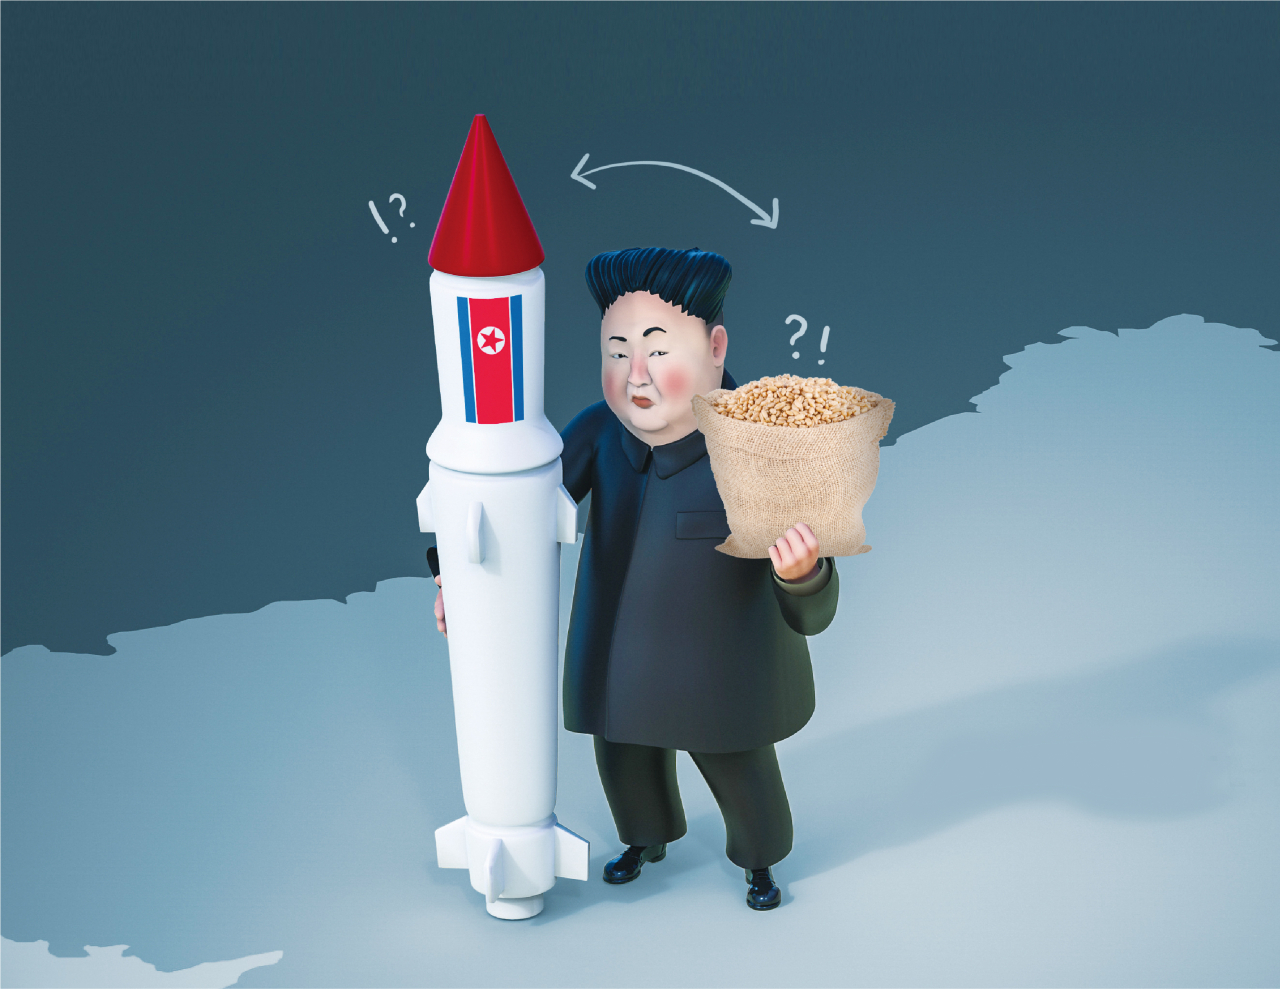 Kim Jong-un's food politics: How food insecurity is leveraged to maintain regime stability (The Korea Herald)